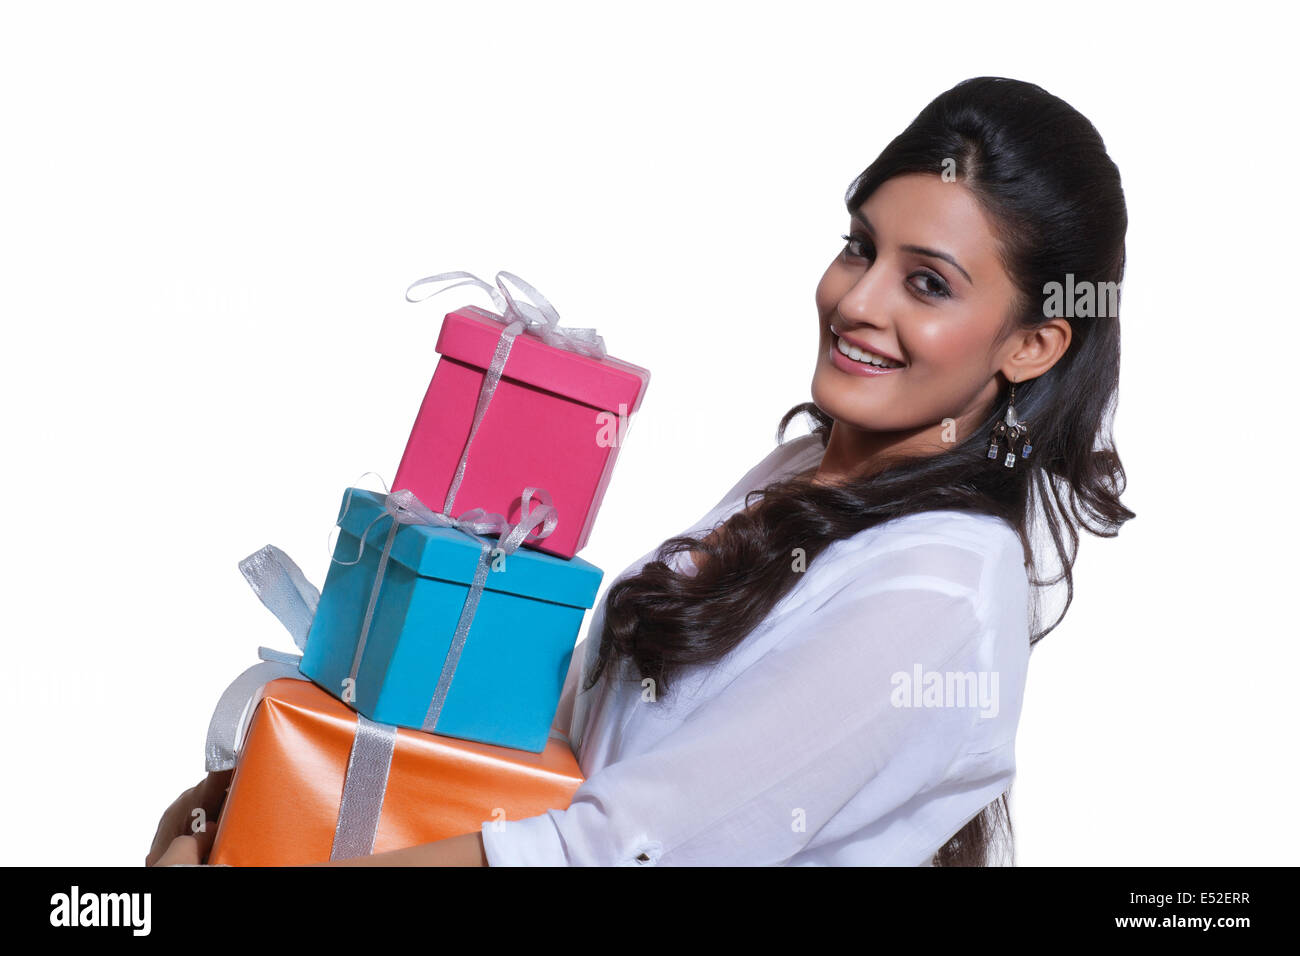 Portrait of a woman holding gift boxes Stock Photo